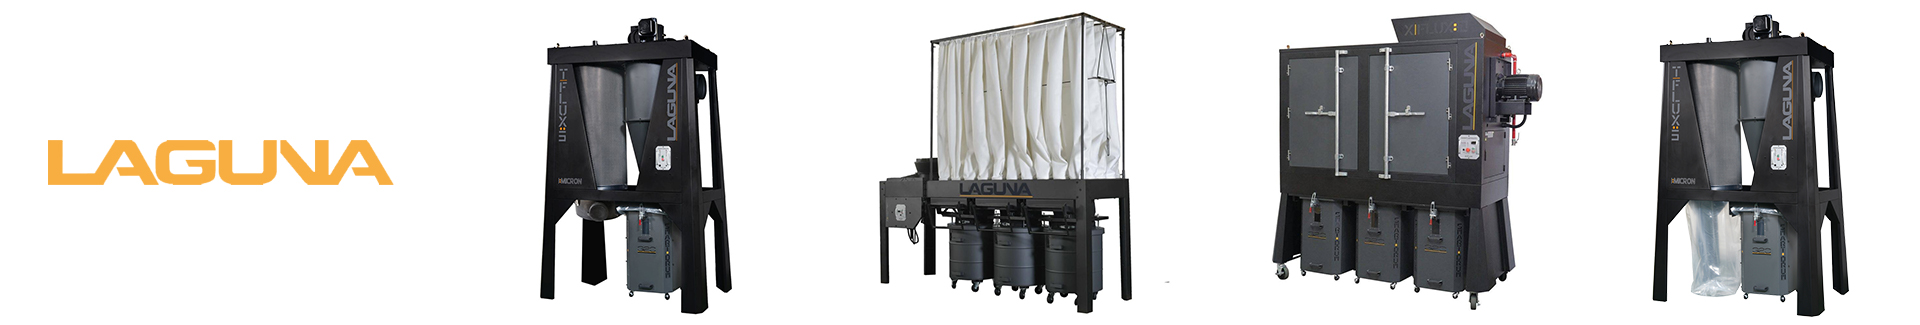 Laguna Industrial Dust Collectors | Typhoon Dust Collection Solutions